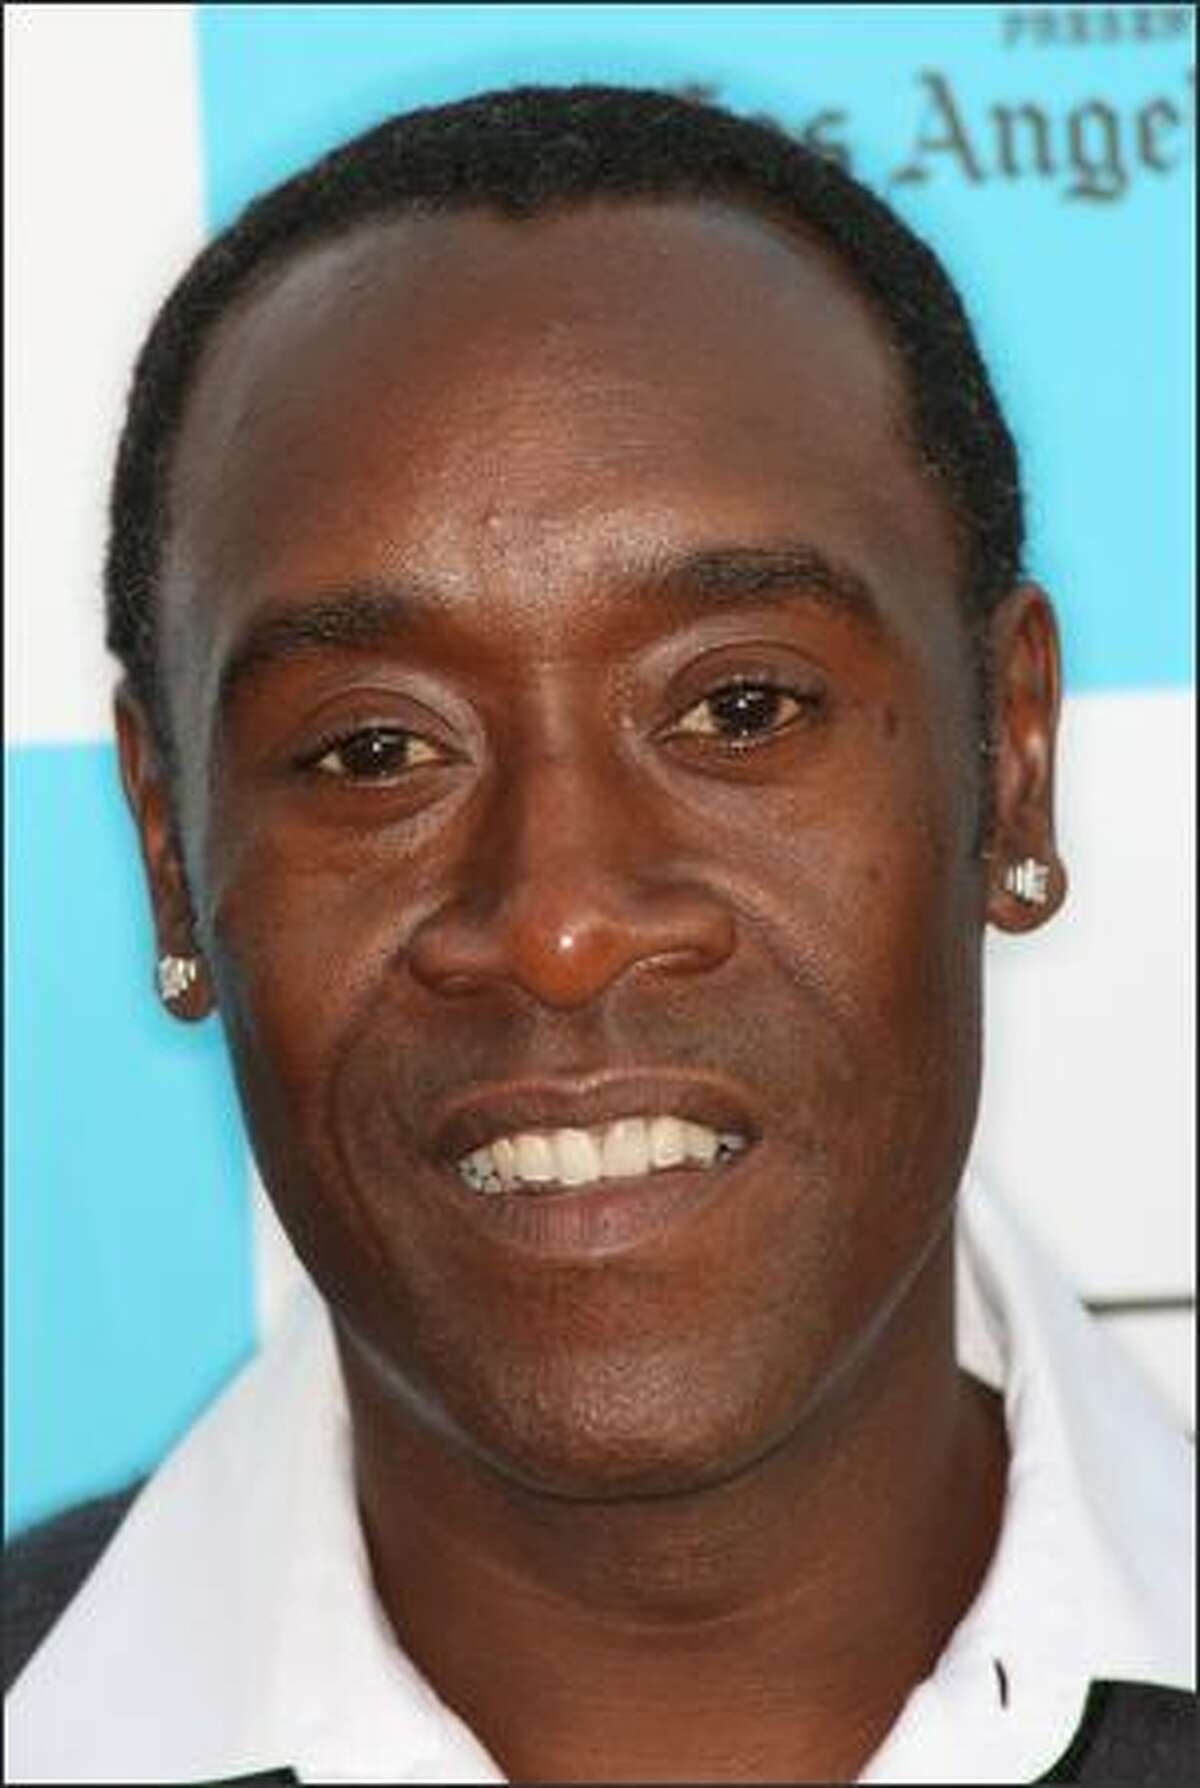 Actor Don Cheadle attends the 2008 Los Angeles Film Festival Awards Ceremony "Spirit of Independence" at the Armand Hammer Museum on Sunday in Westwood, Calif.